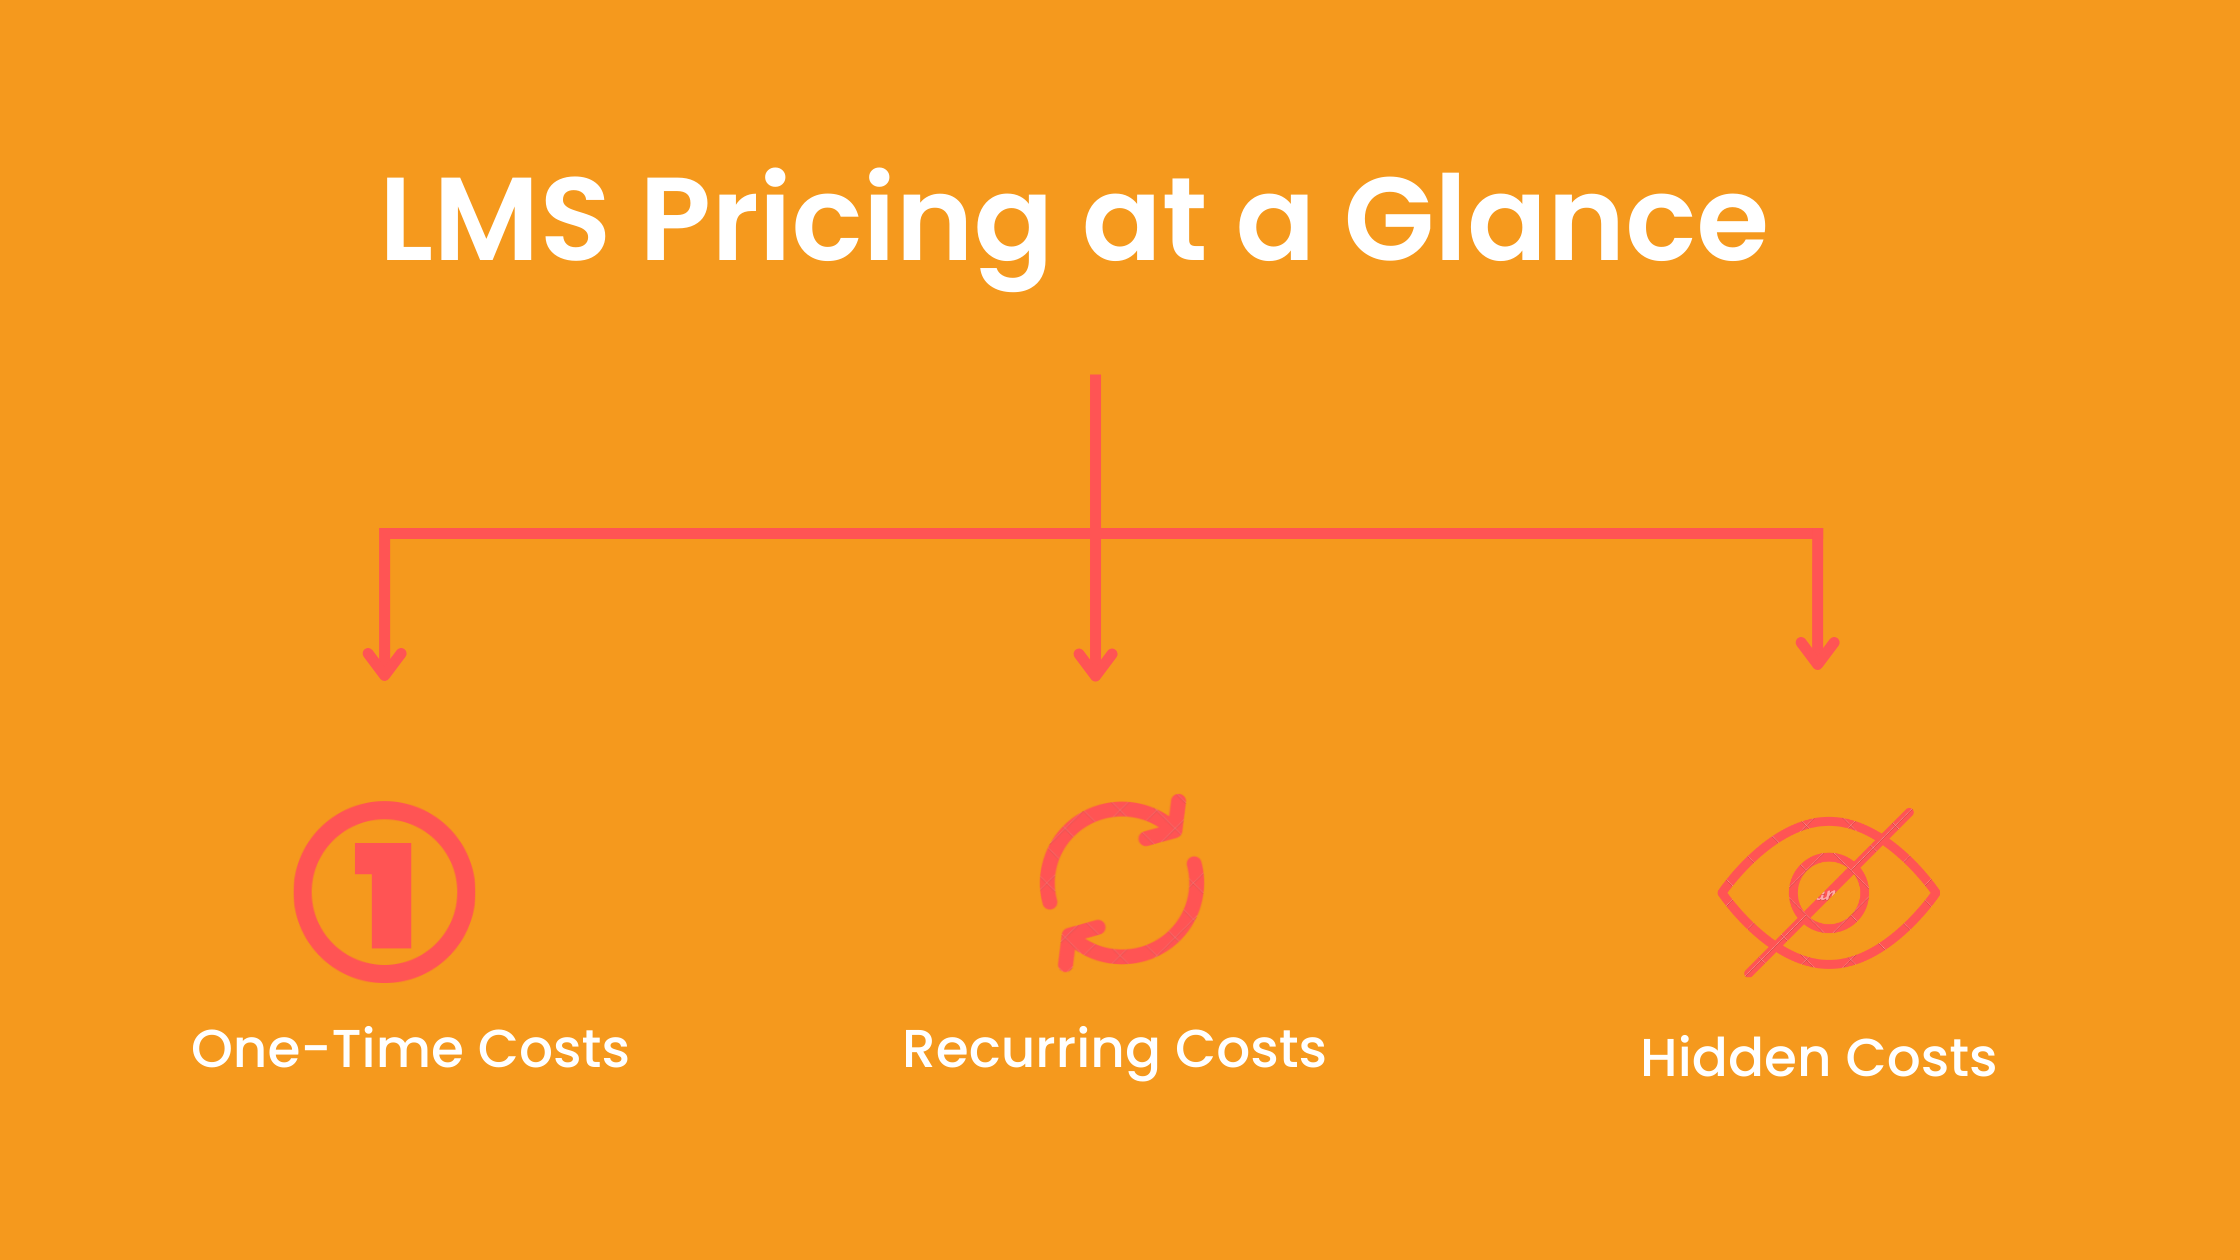 LMS Pricing at a Glance